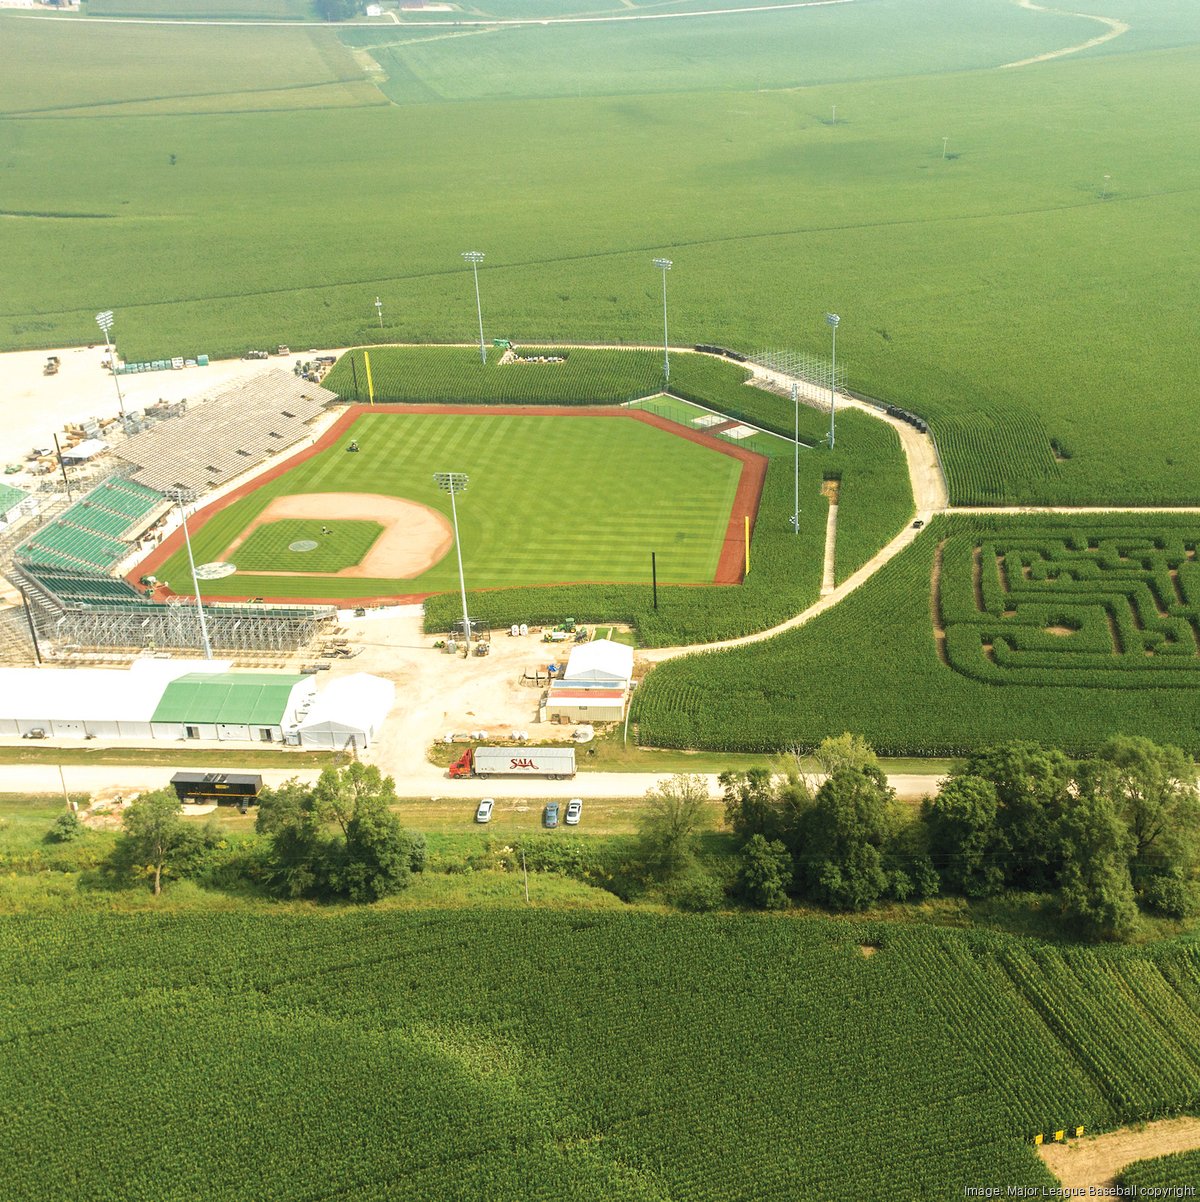 MLB at Field of Dreams game date